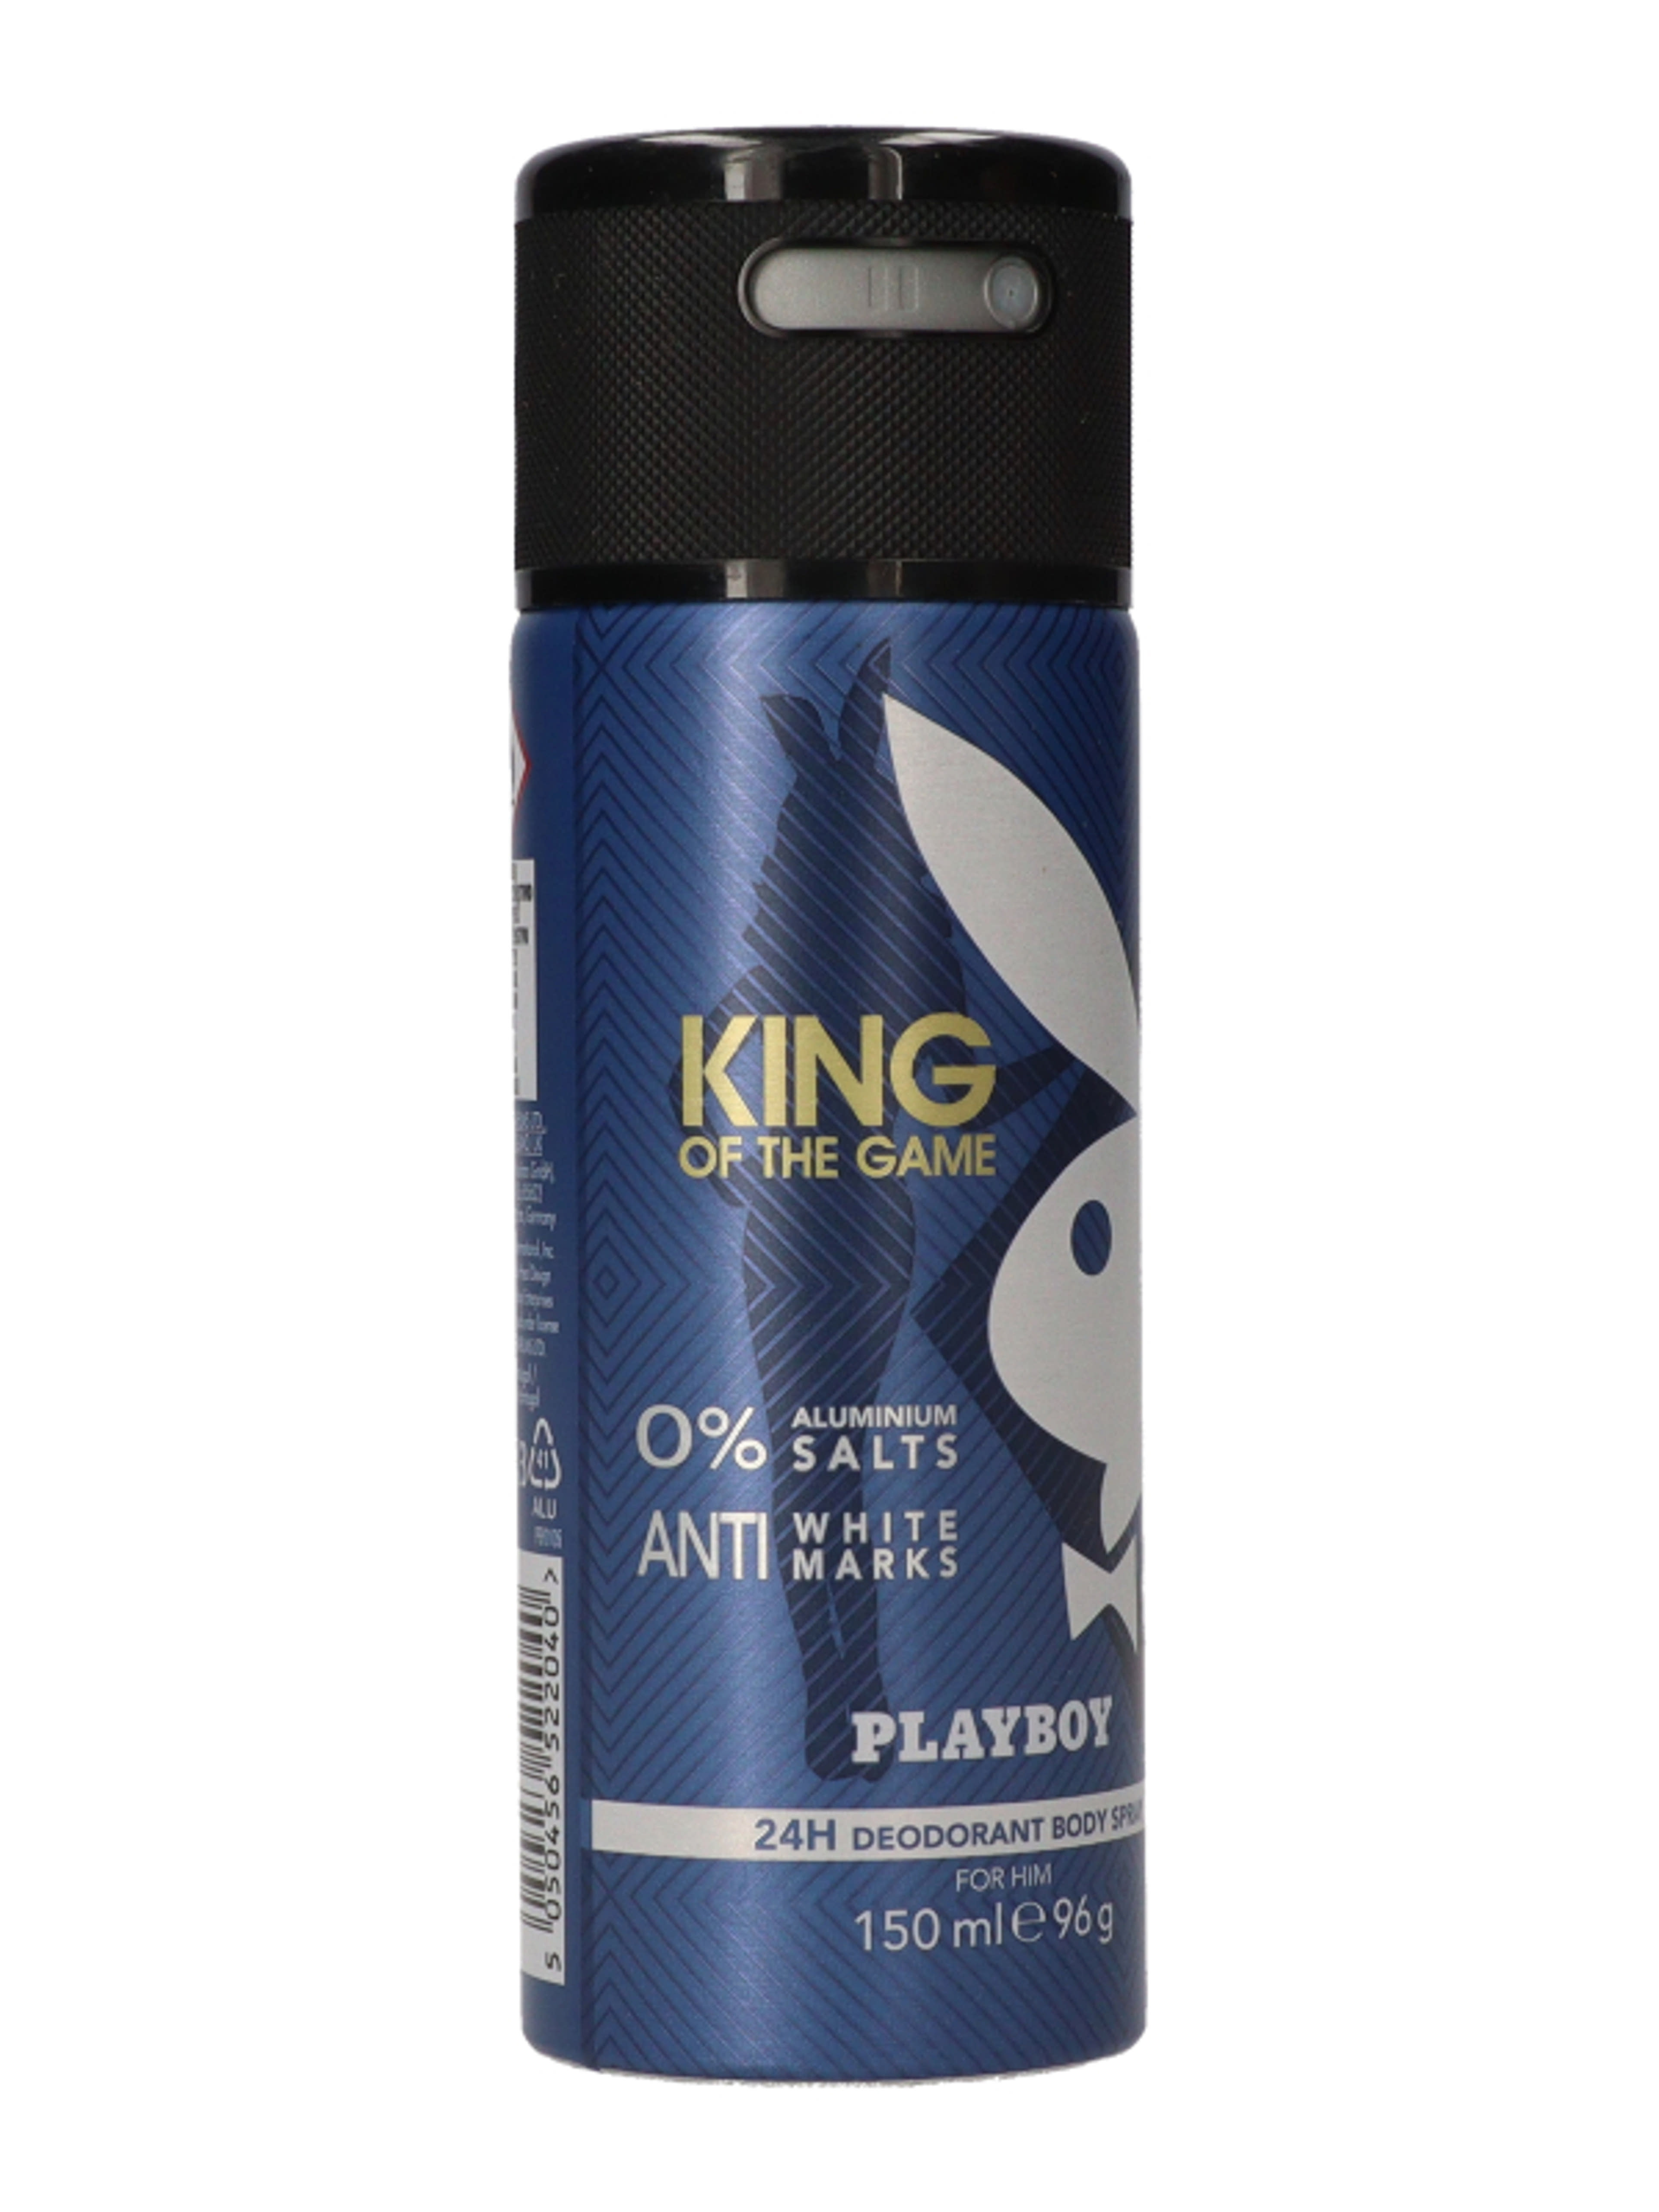 Playboy King of the Game dezodor - 150 ml-5